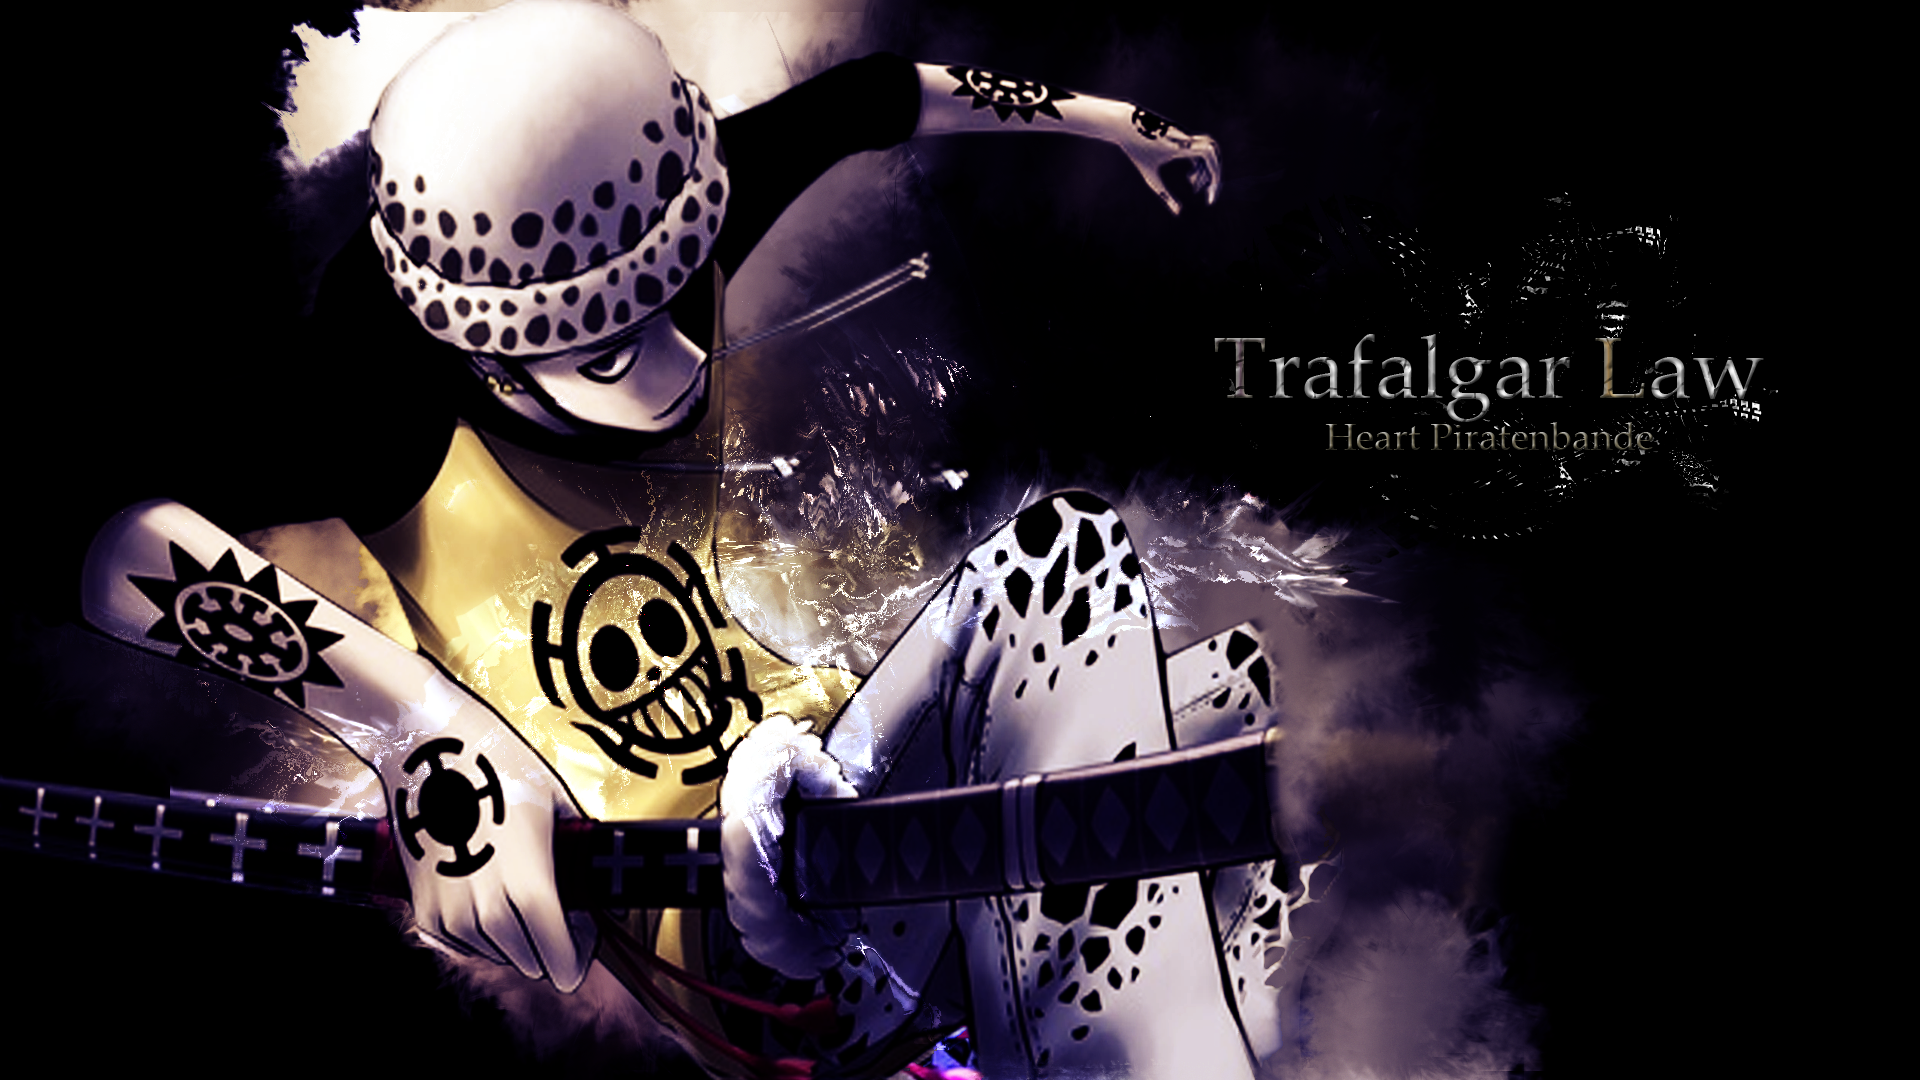 270 Trafalgar Law HD Wallpapers and Backgrounds